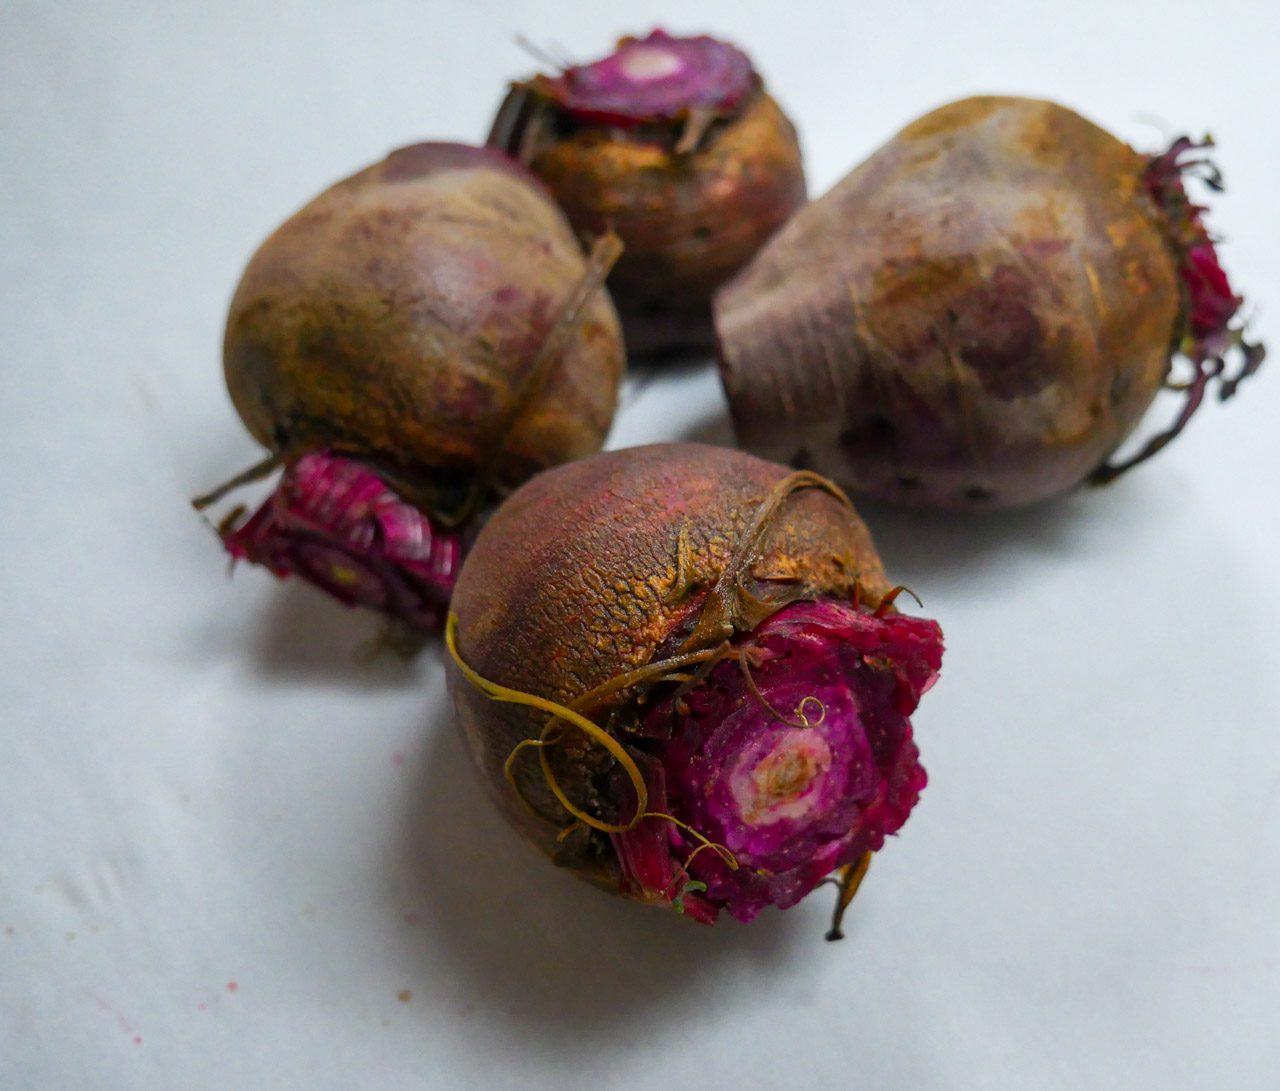 Beets trimmed for beetroot soup